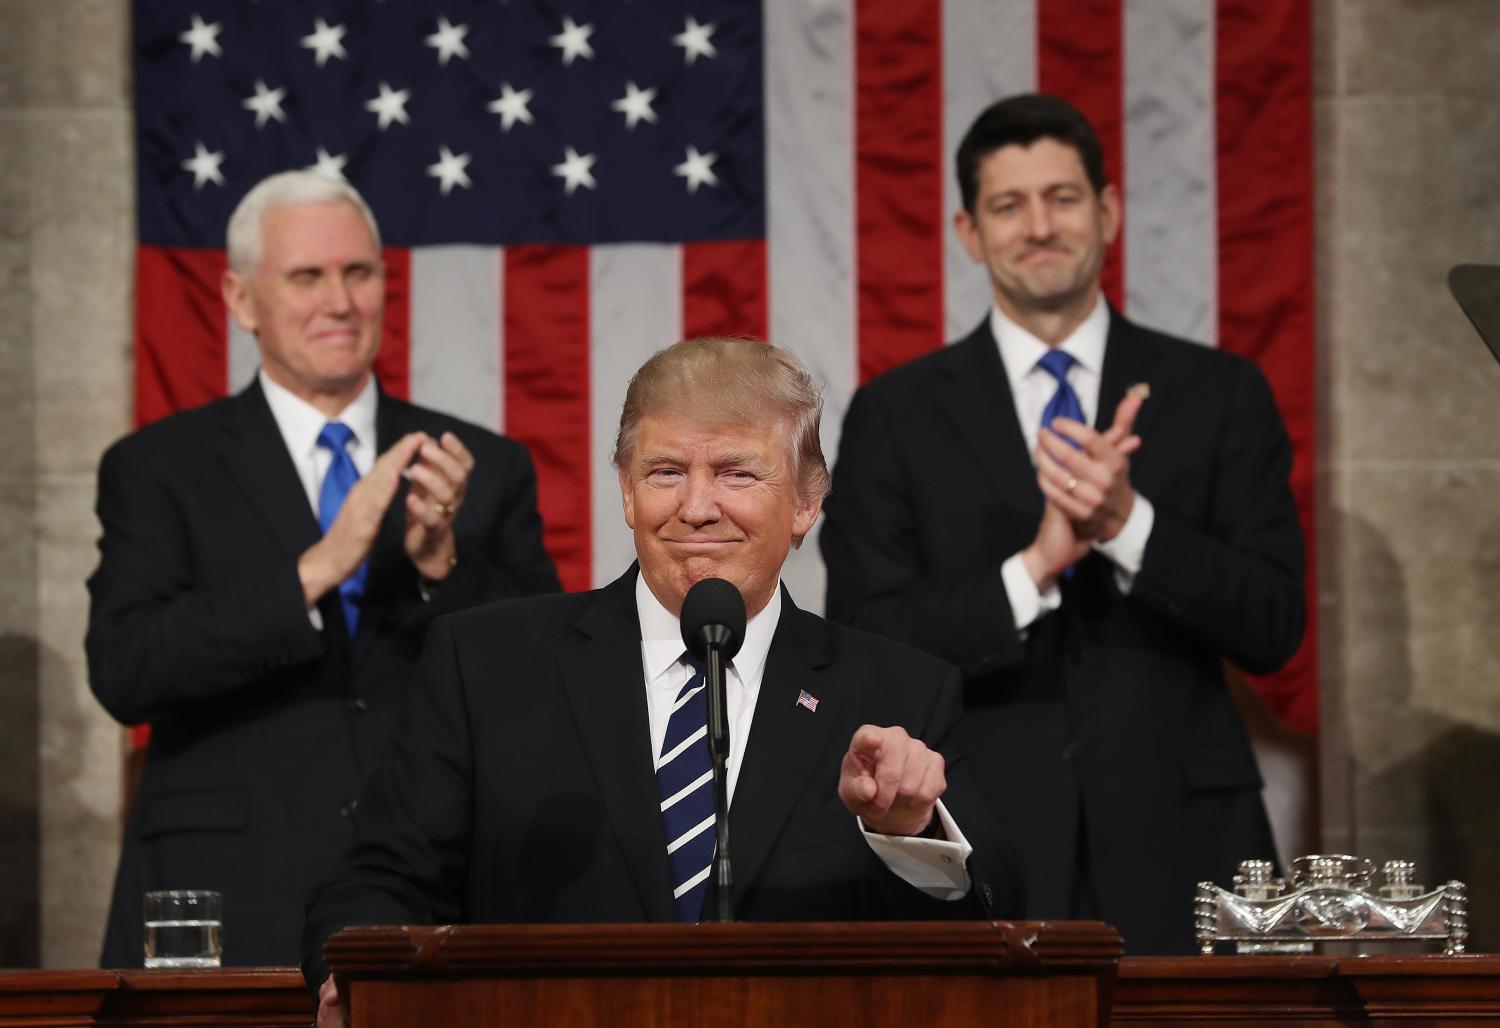 Trump, Paul Ryan, and Mike Pence during address to Congress